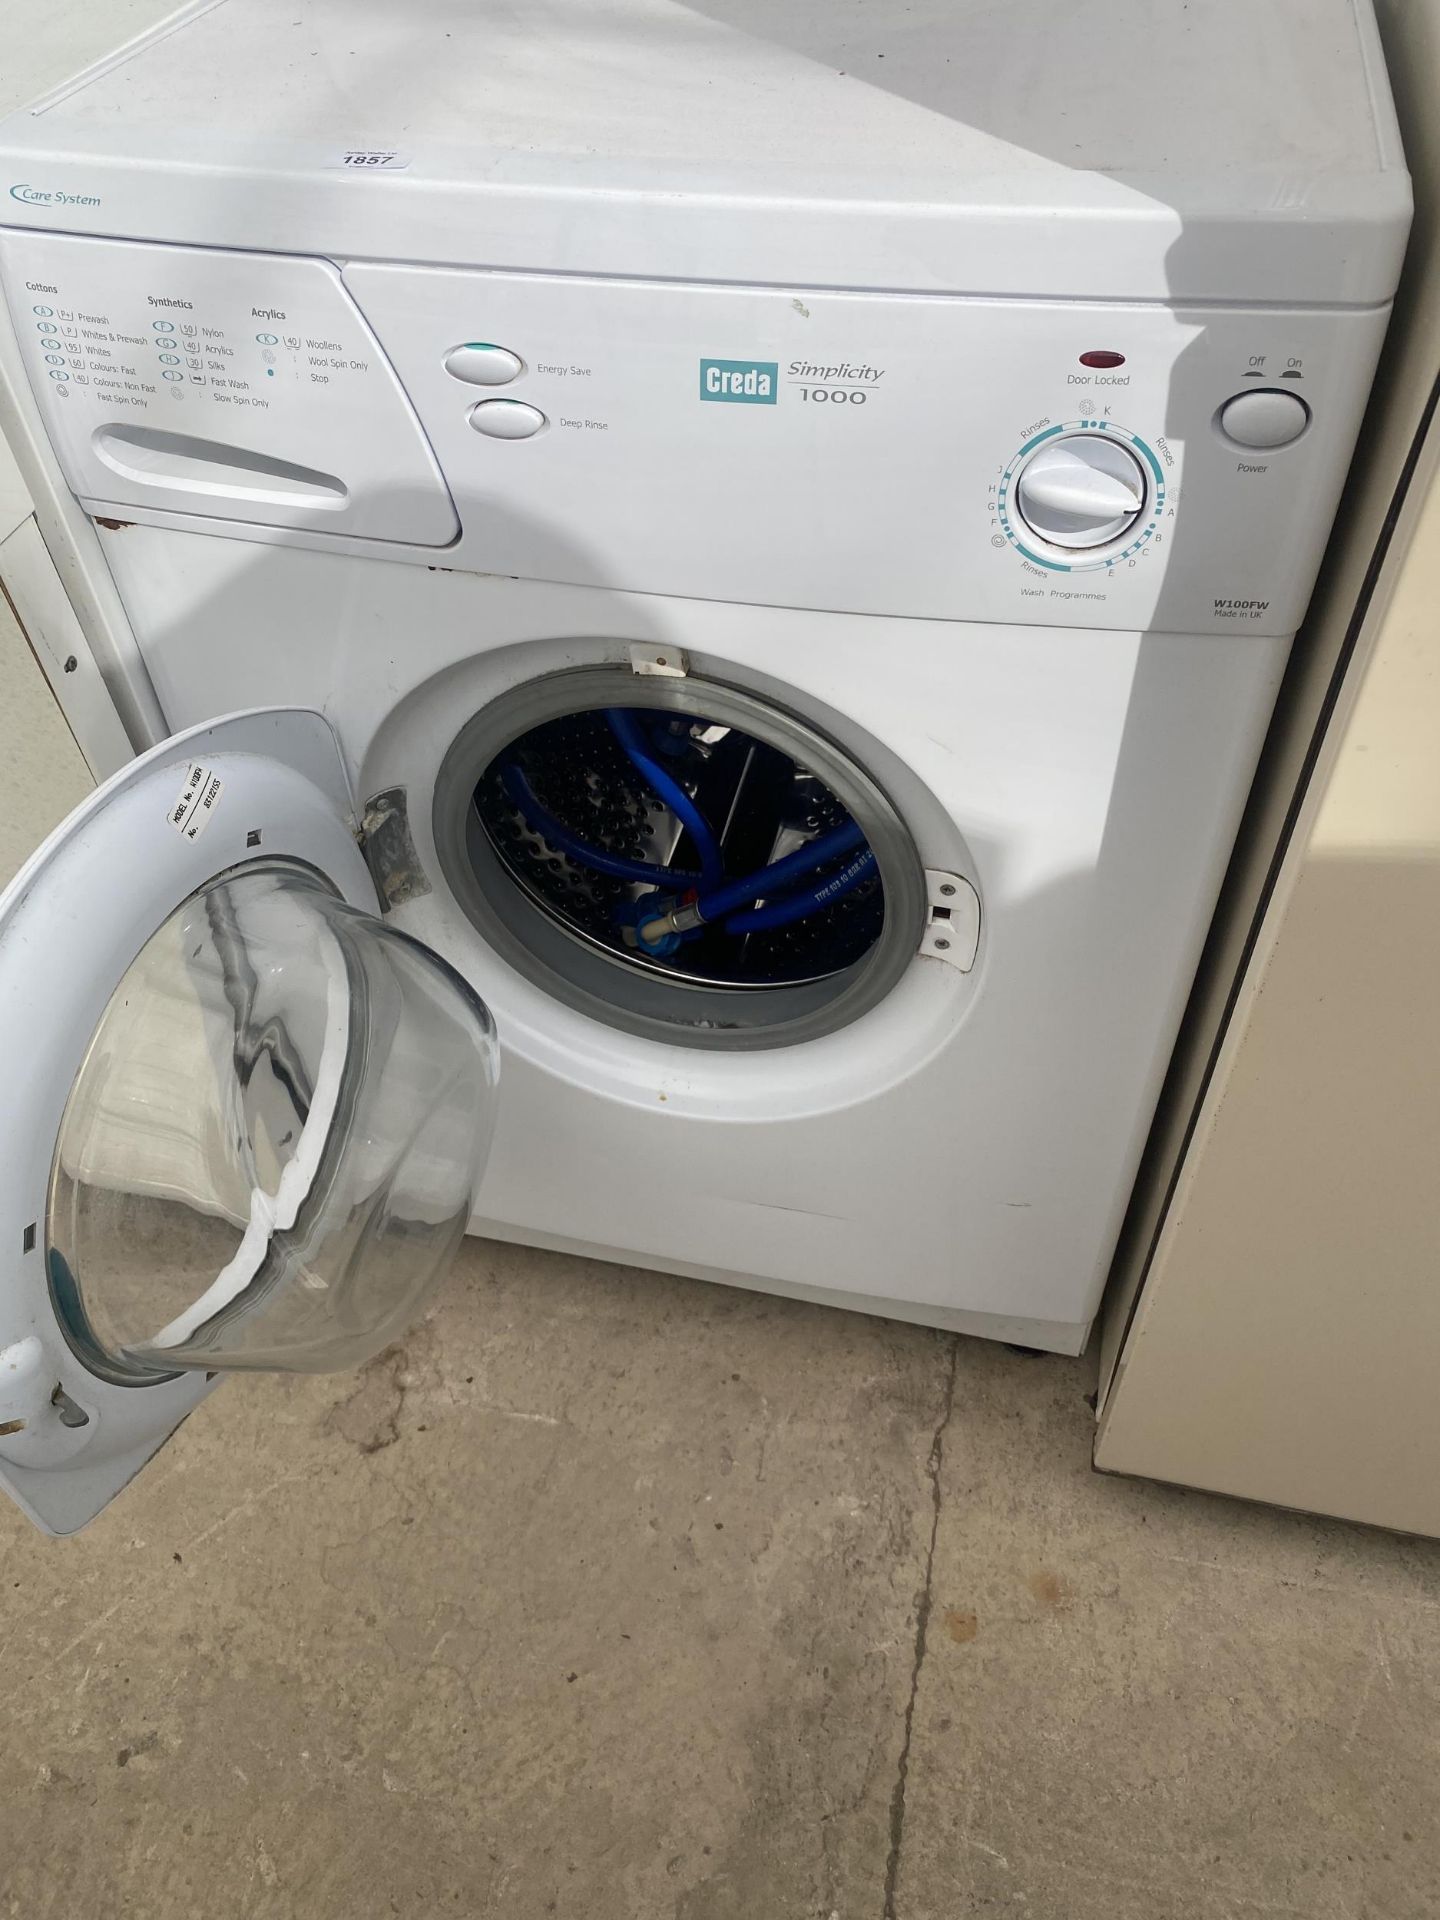 A WHITE CREDA WASHING MACHINE BELIEVED IN GOOD WORKING ORDER BUT NO WARRANTY GIVEN - Image 4 of 4